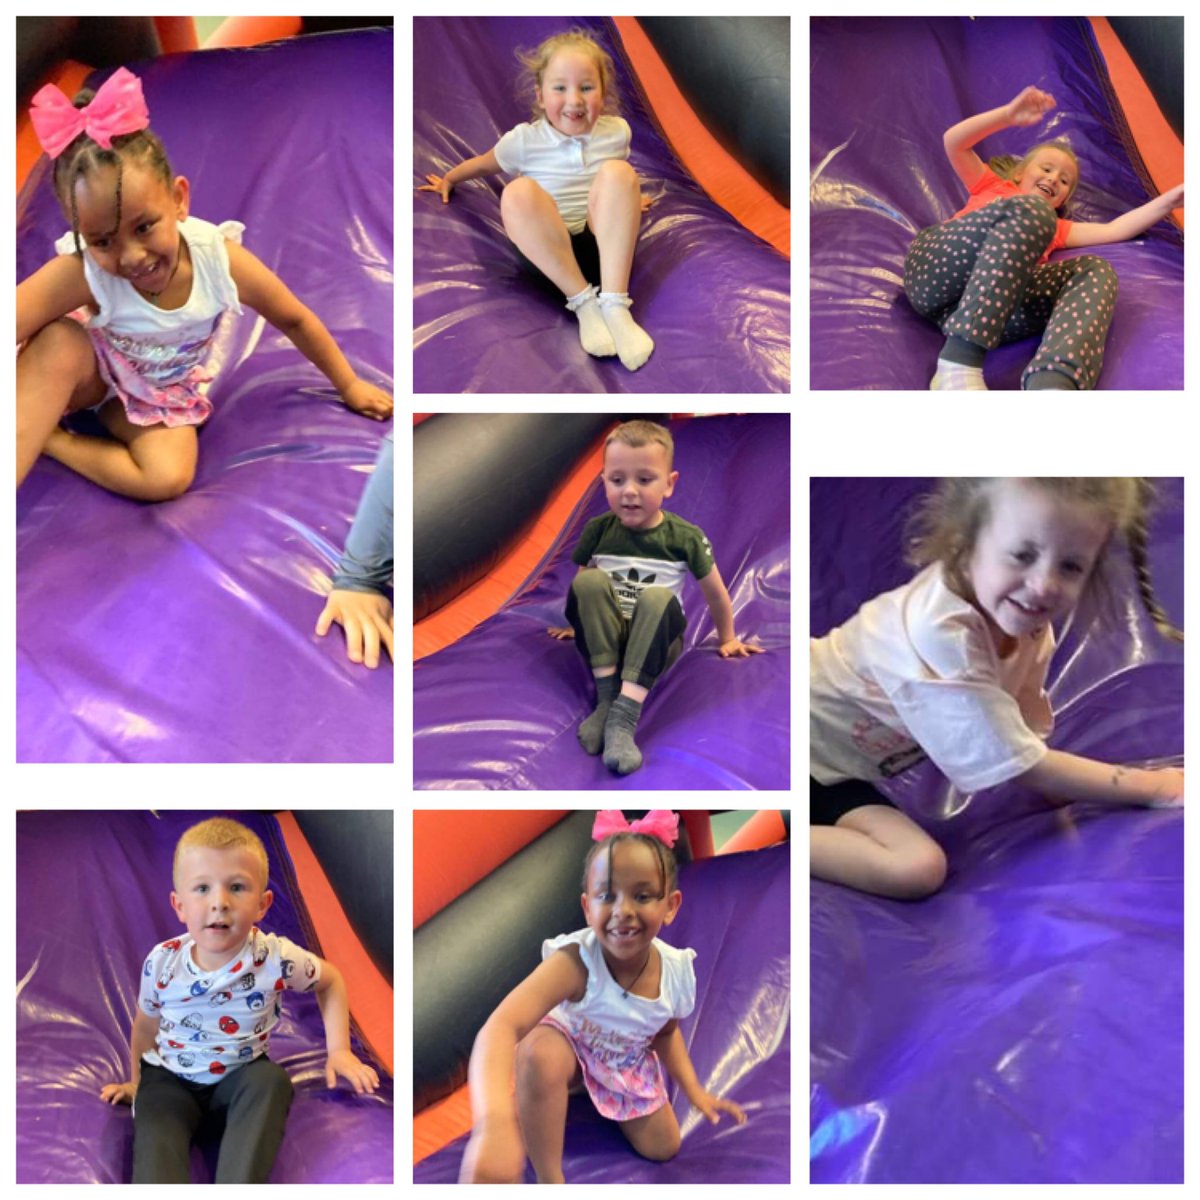 Primary 1a had lots of fun at the inflatable today for our fun day! @StMonicaMilton @Mrs_Greig #makingmemories #schoolfunday